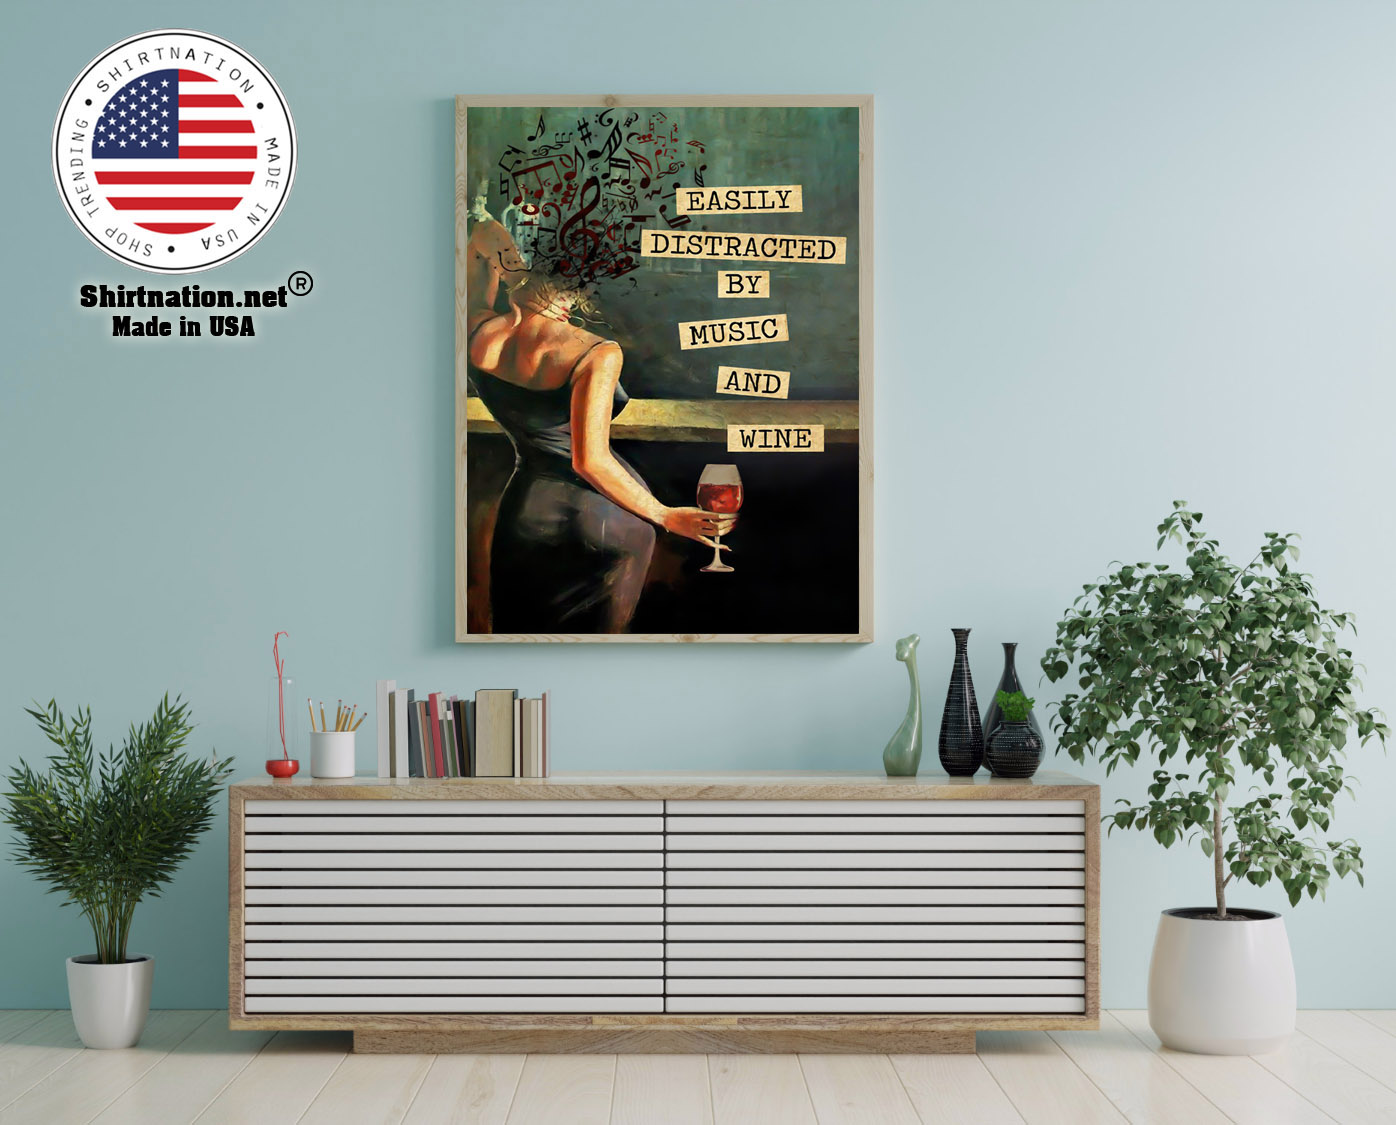 Vintage easily distracted by music and wine poster 16 1